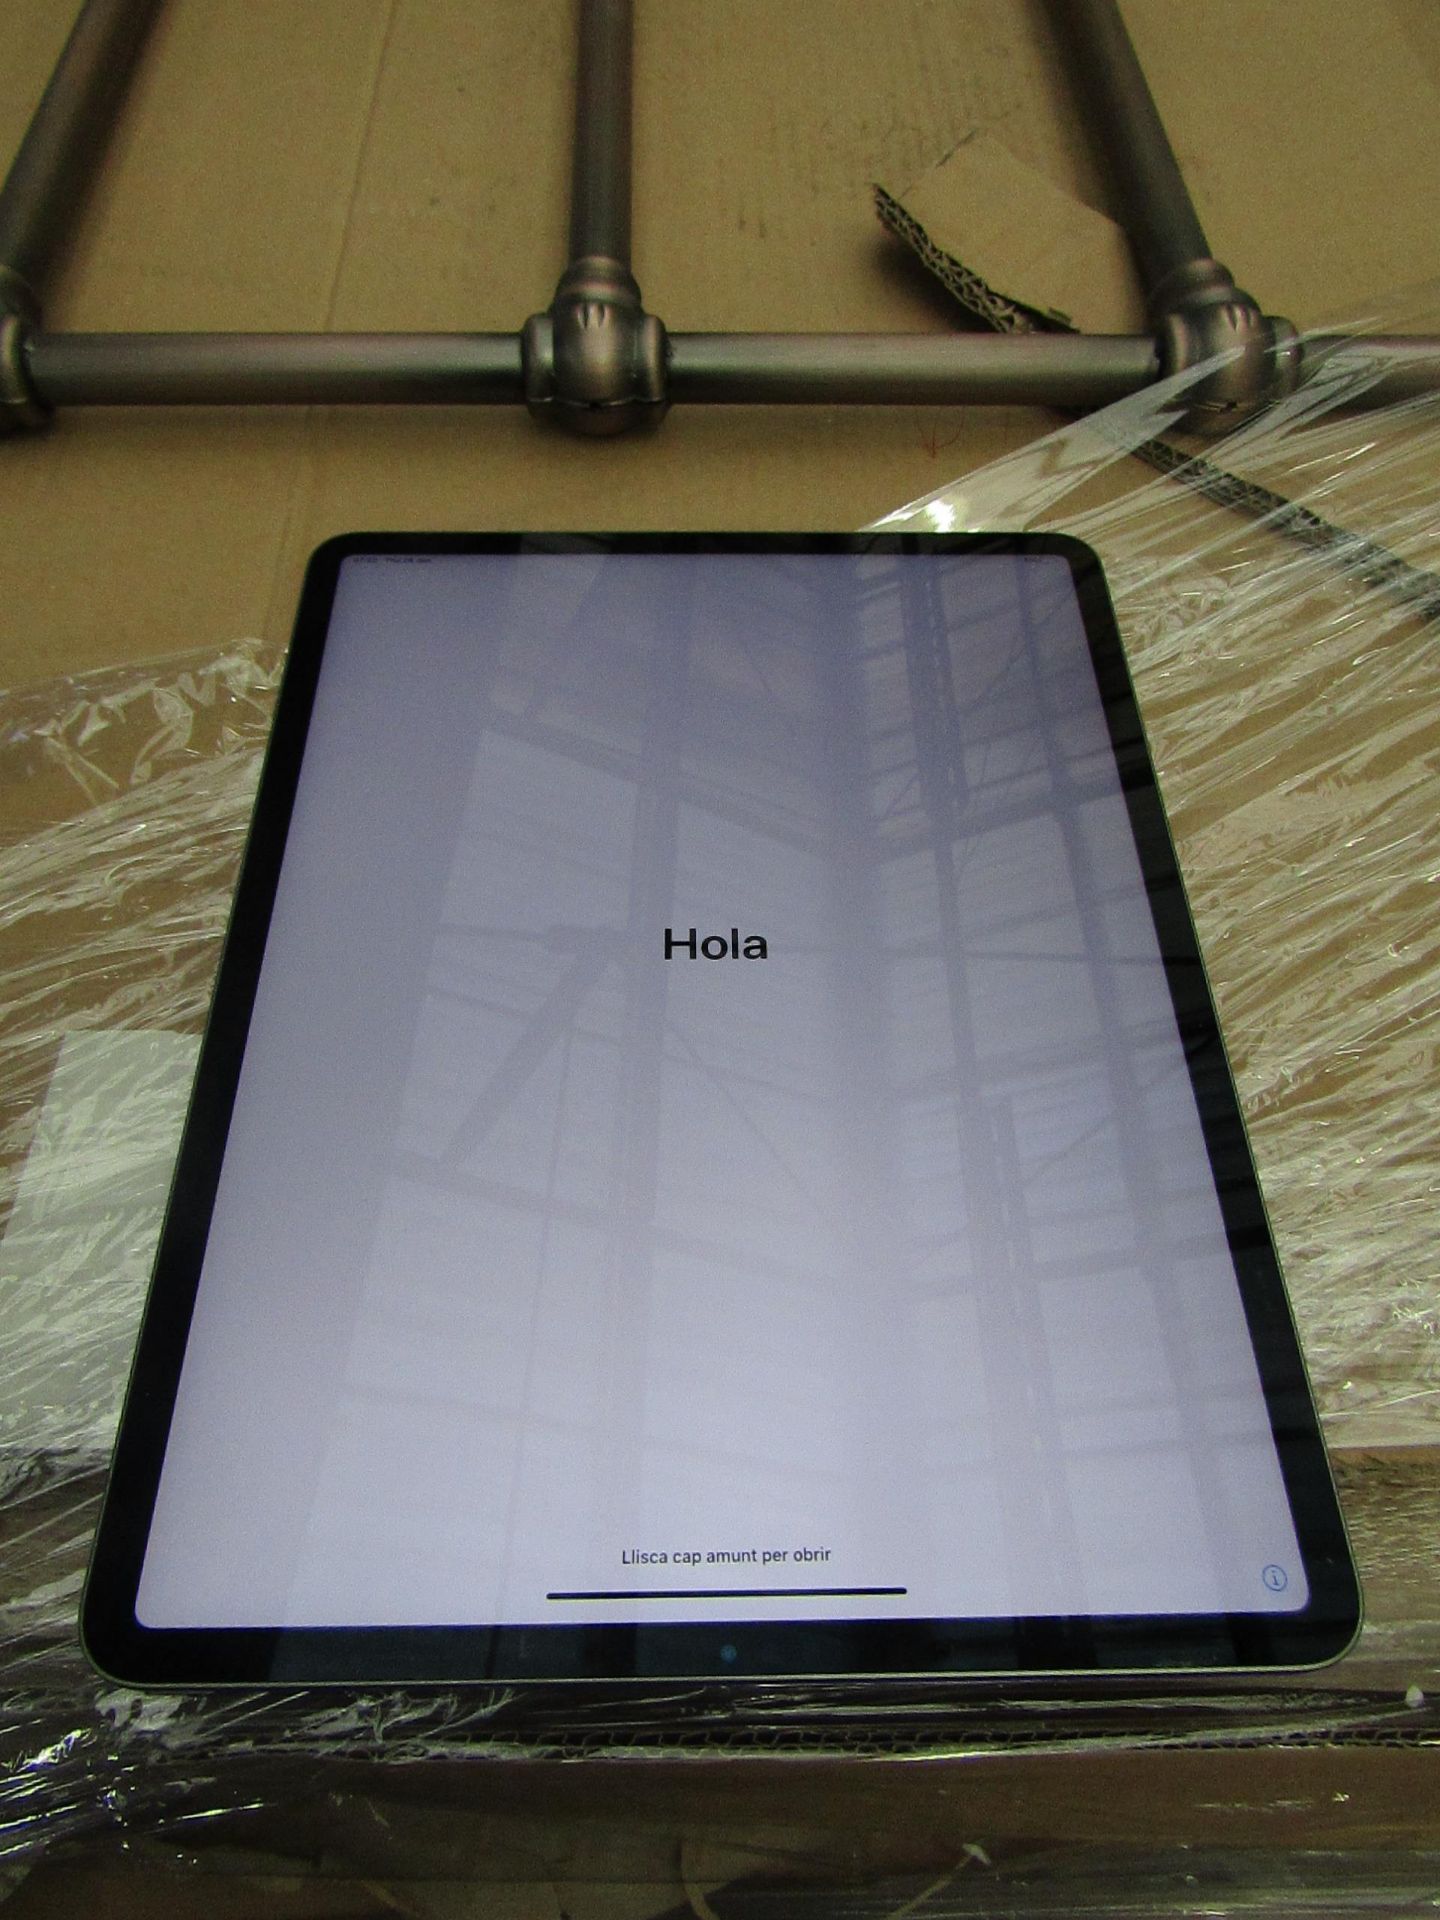 Apple iPad Pro 12.9" 3rd Gen (A1876), tested working for main function (screen display) and